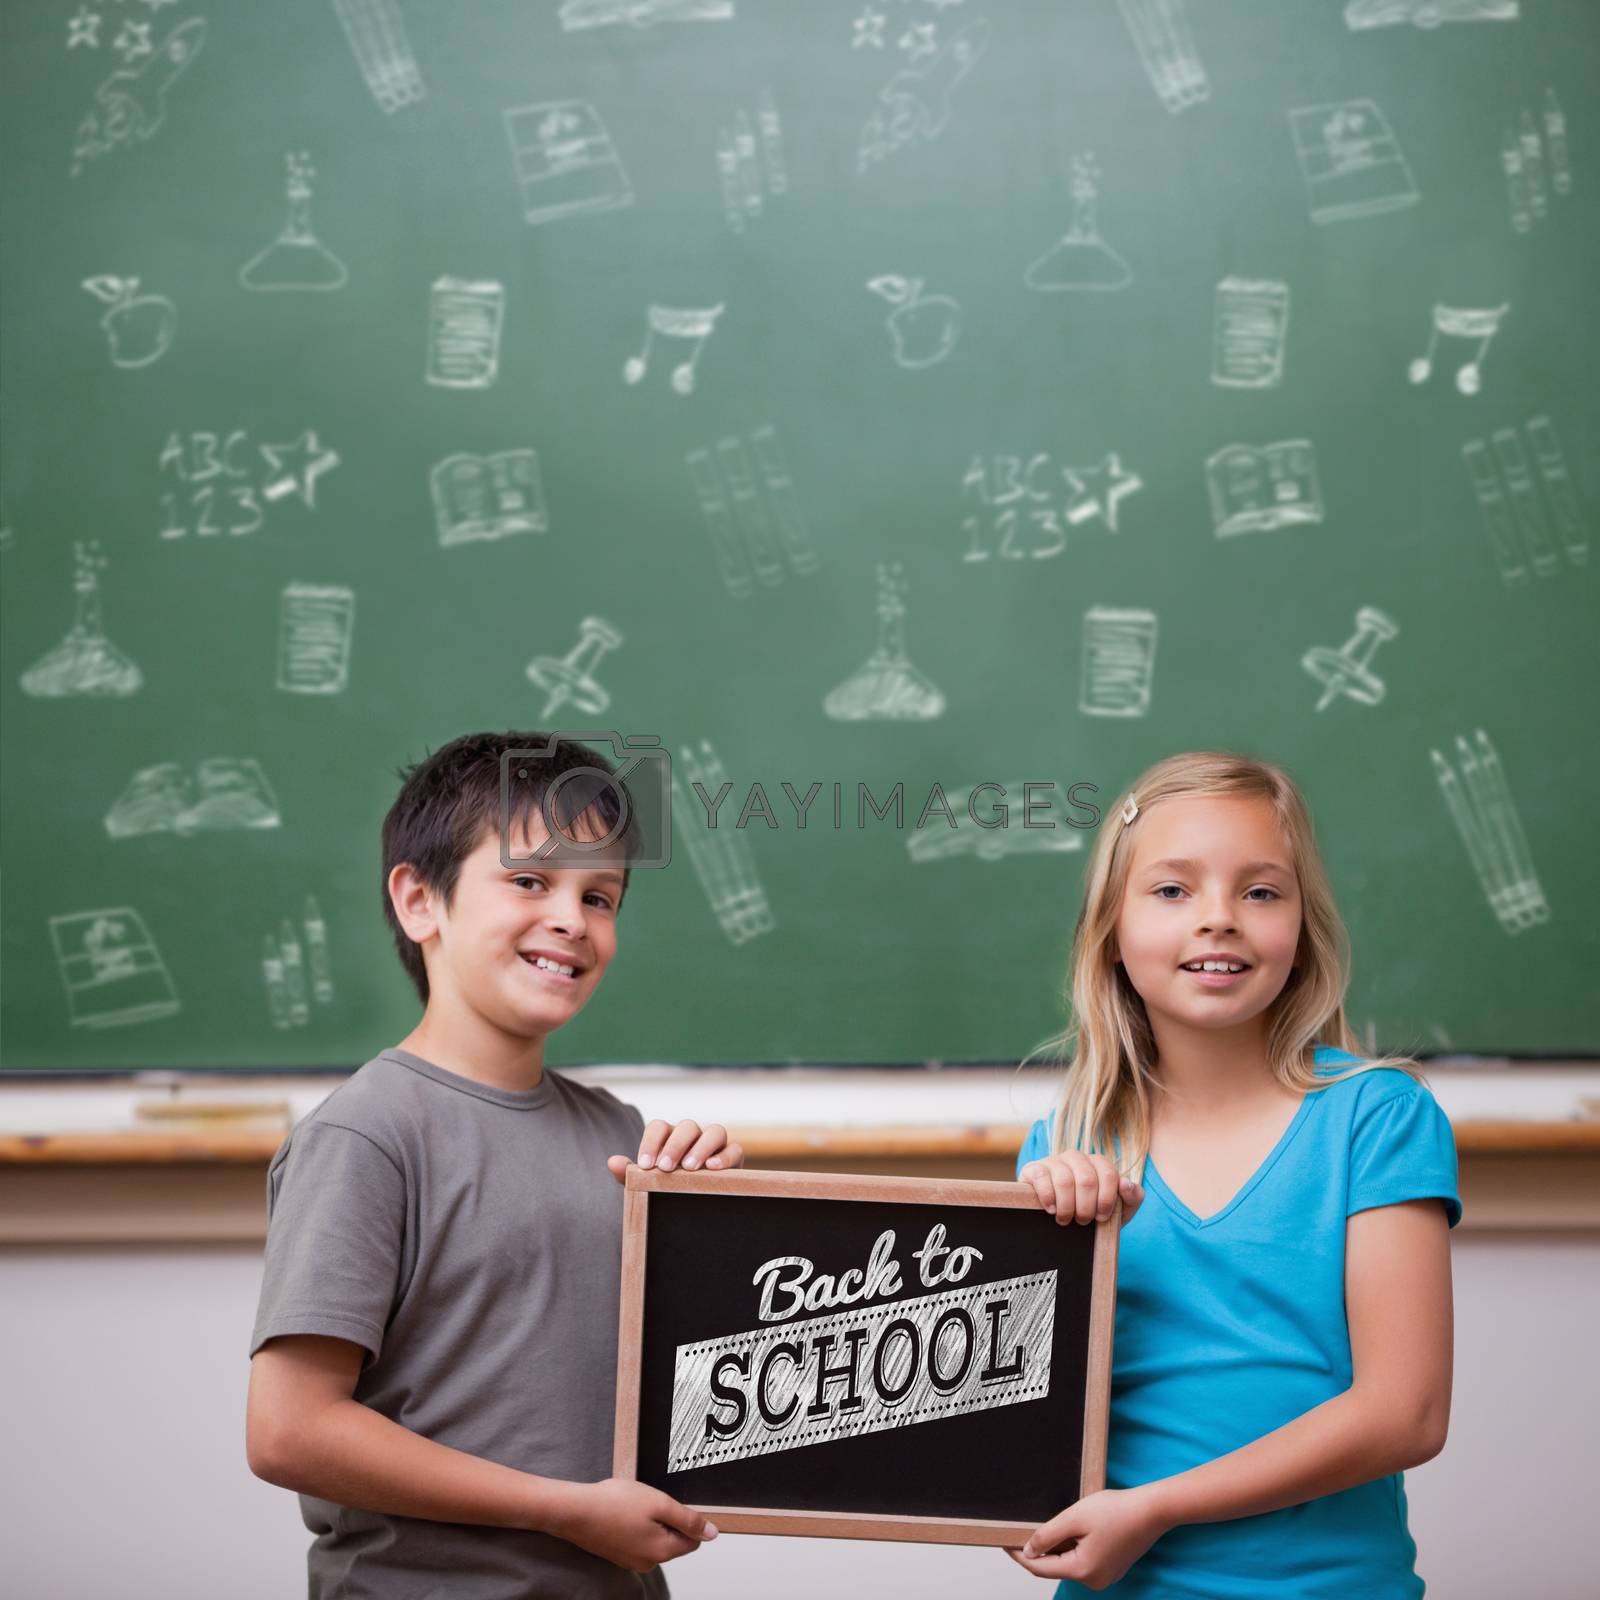 Royalty free image of Composite image of back to school message by Wavebreakmedia